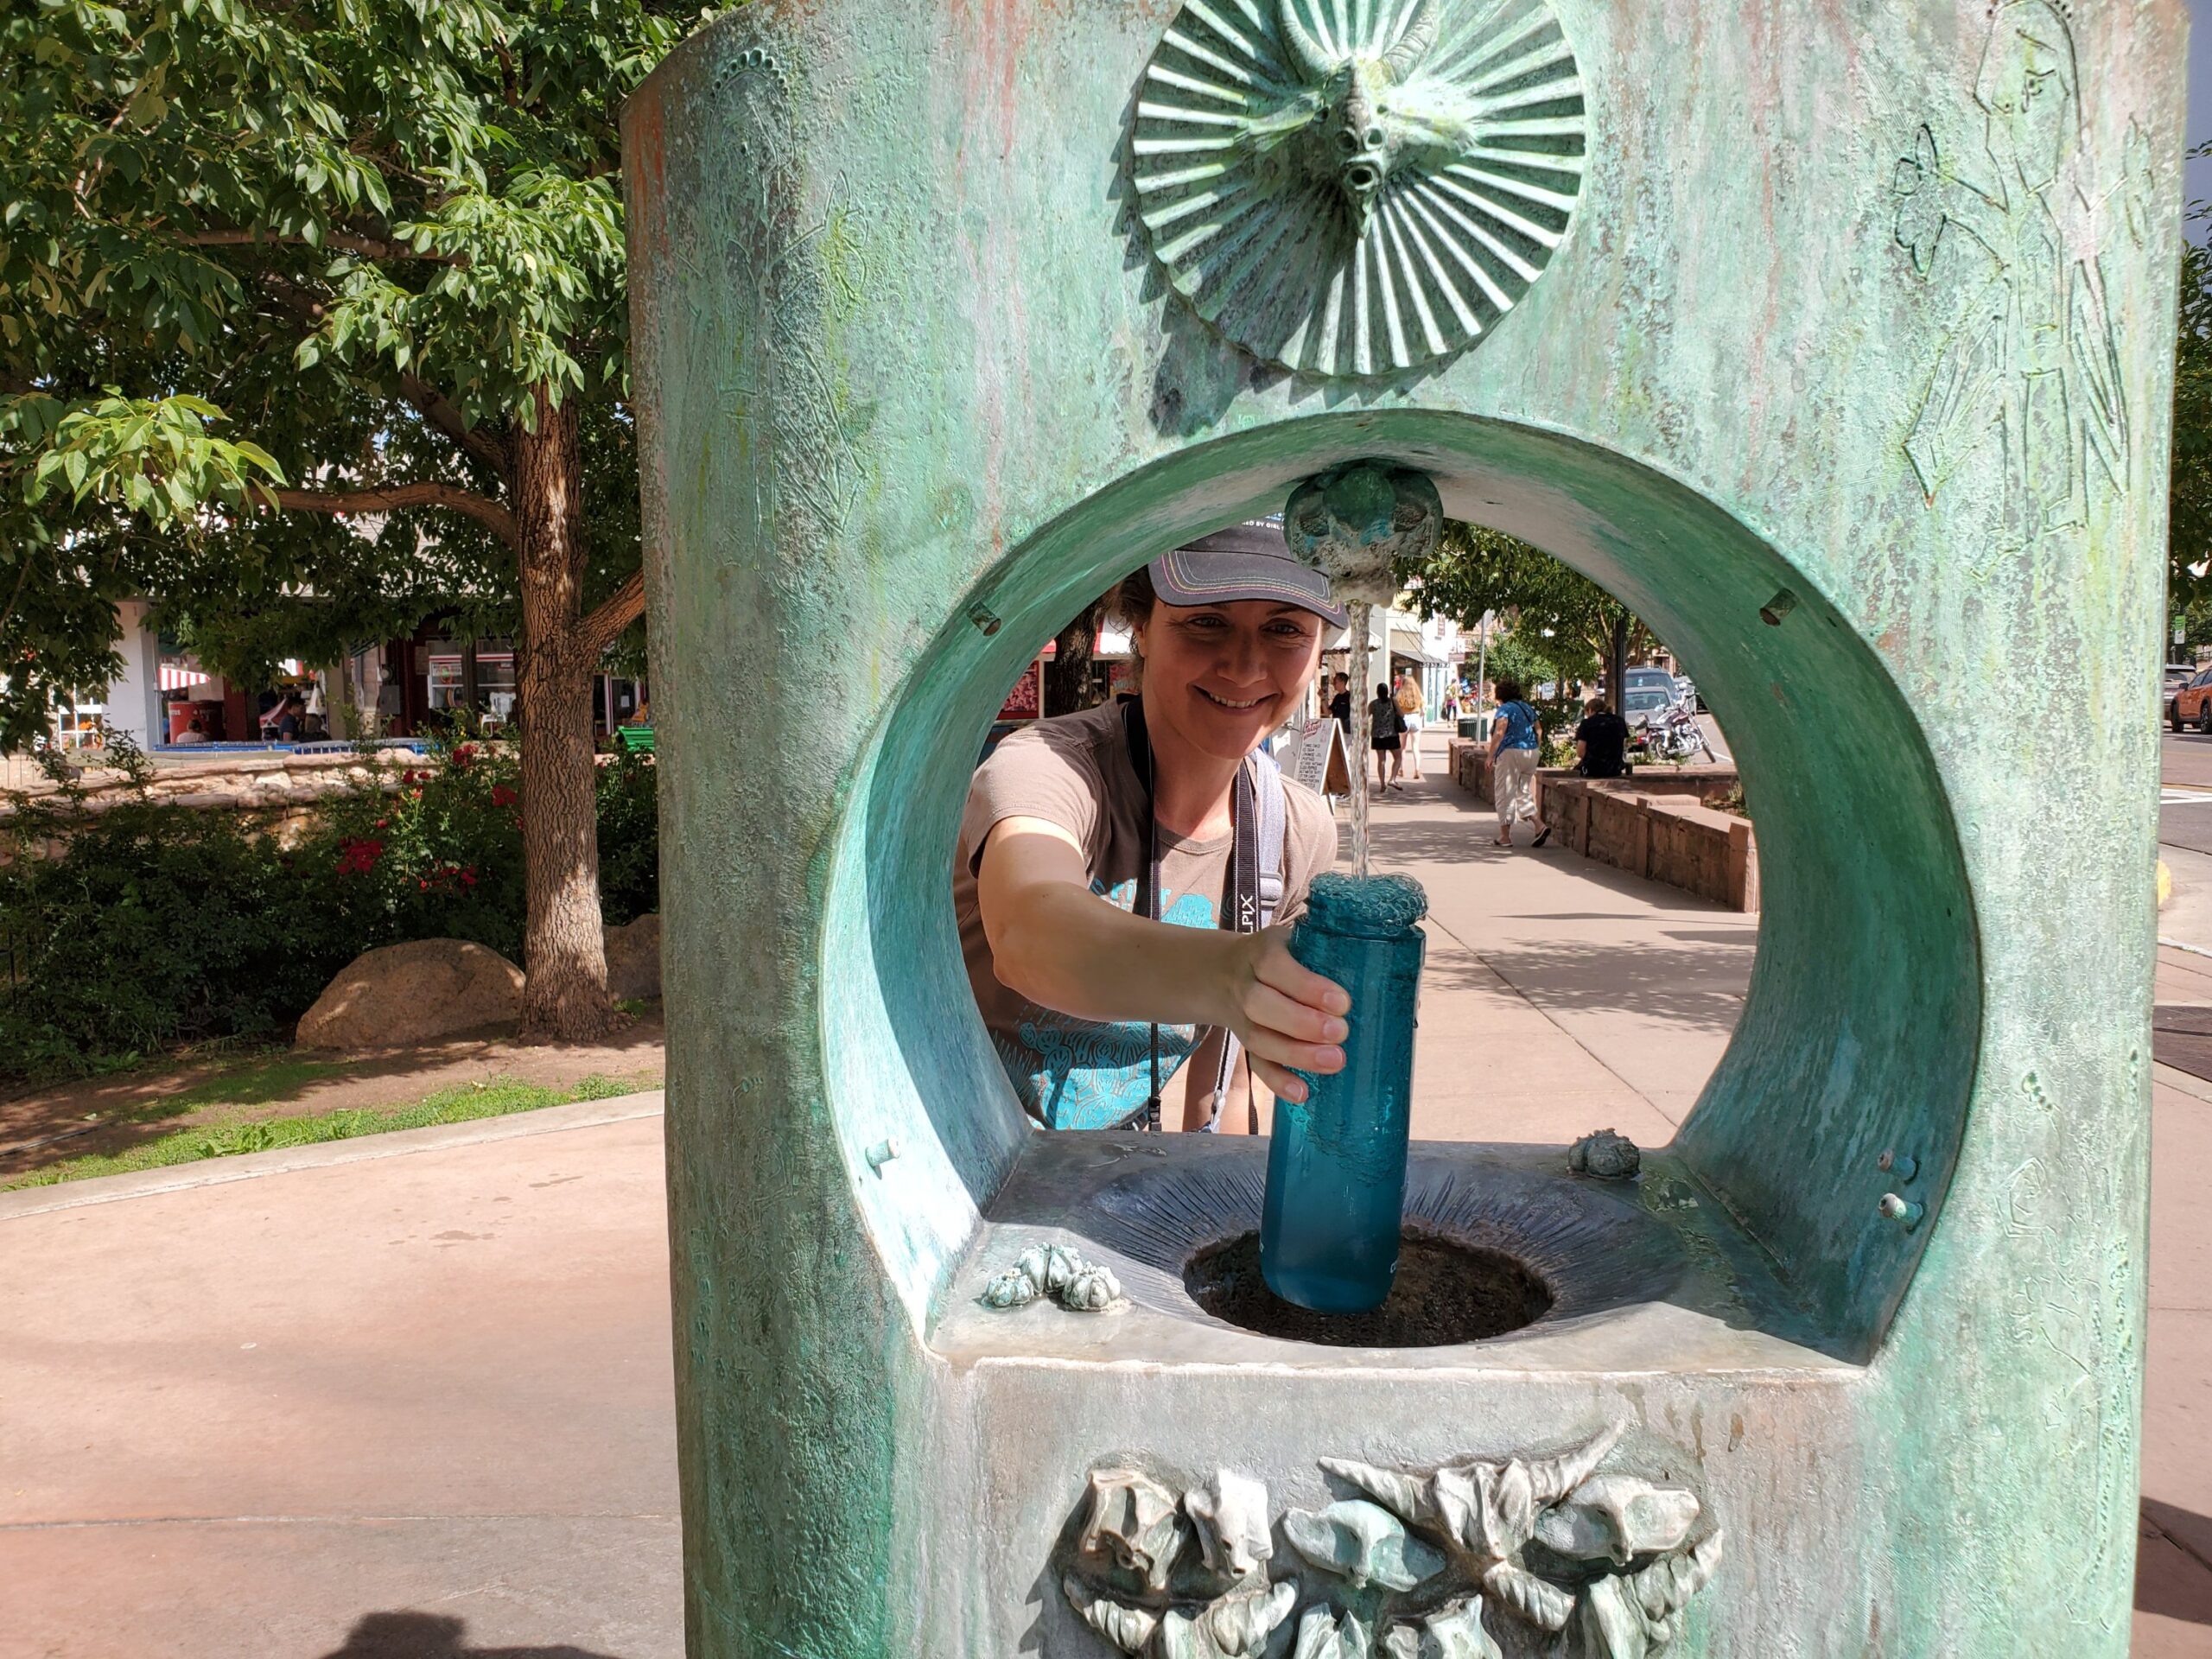 Mandy at the Mineral Water Fountain in Manitou